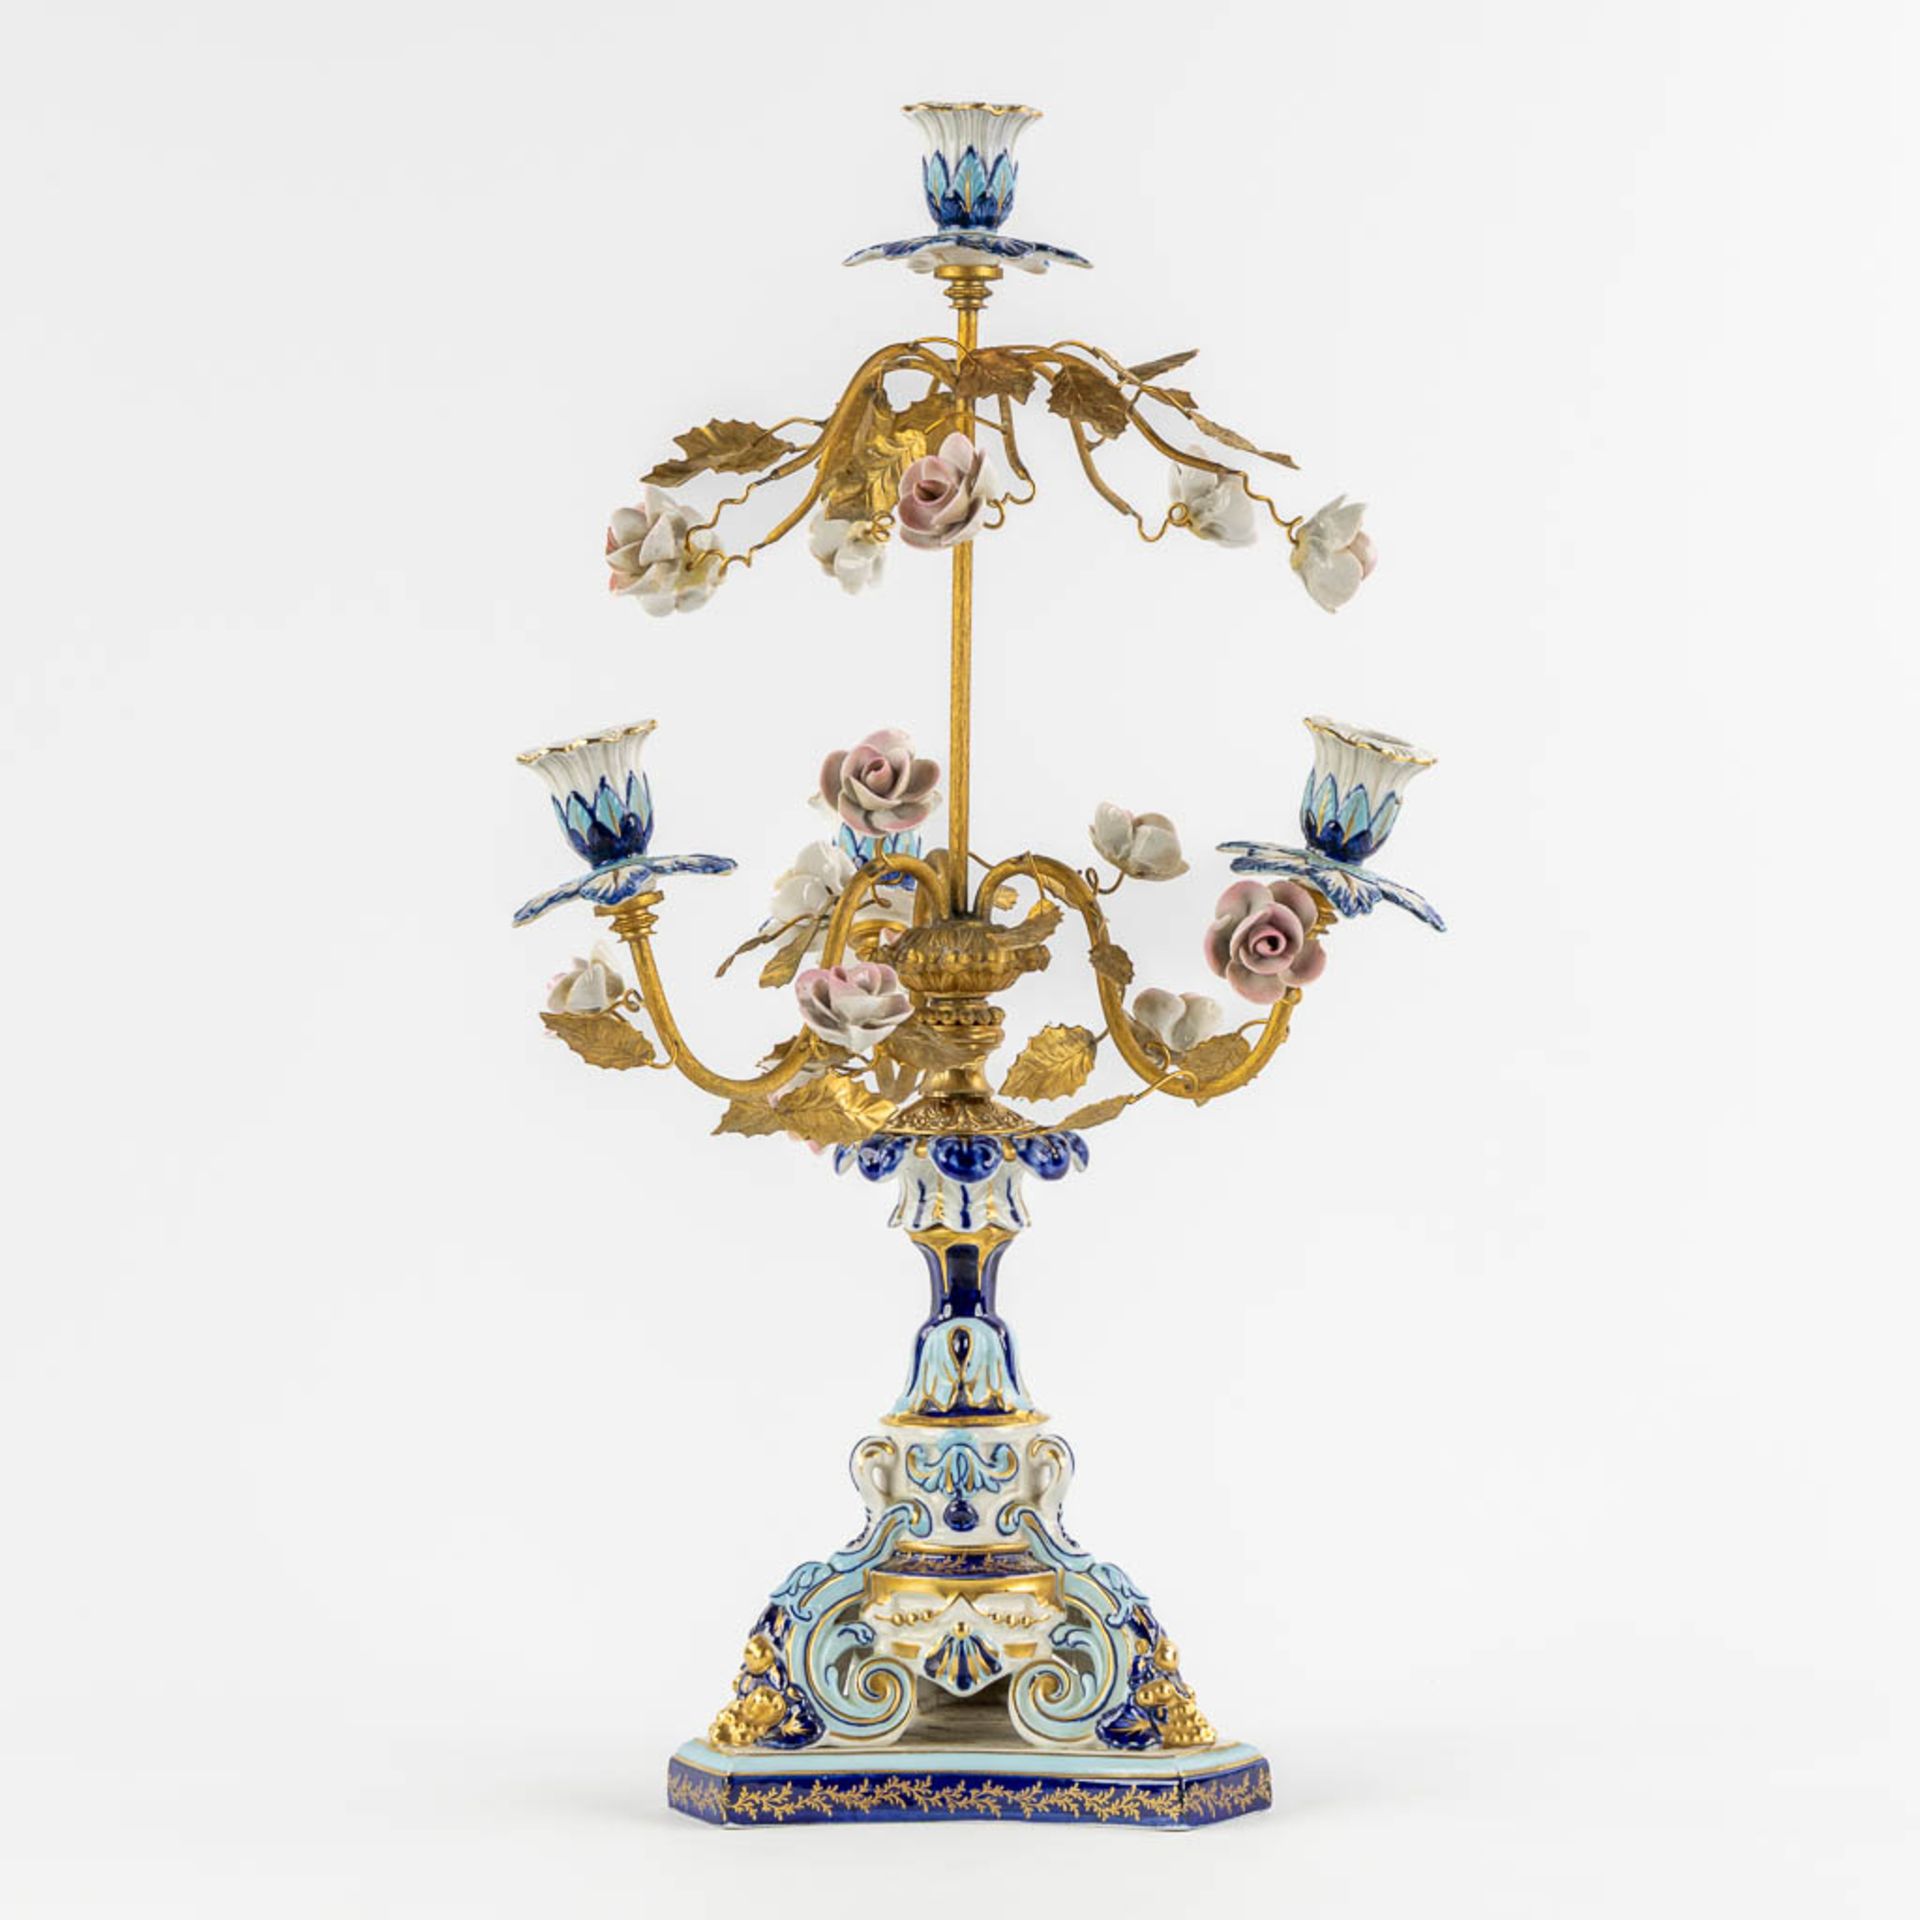 A candelabra, gilt brass and polychrome porcelain with flowers. Sèvres marks. (H:51 x D:24 cm) - Image 4 of 10